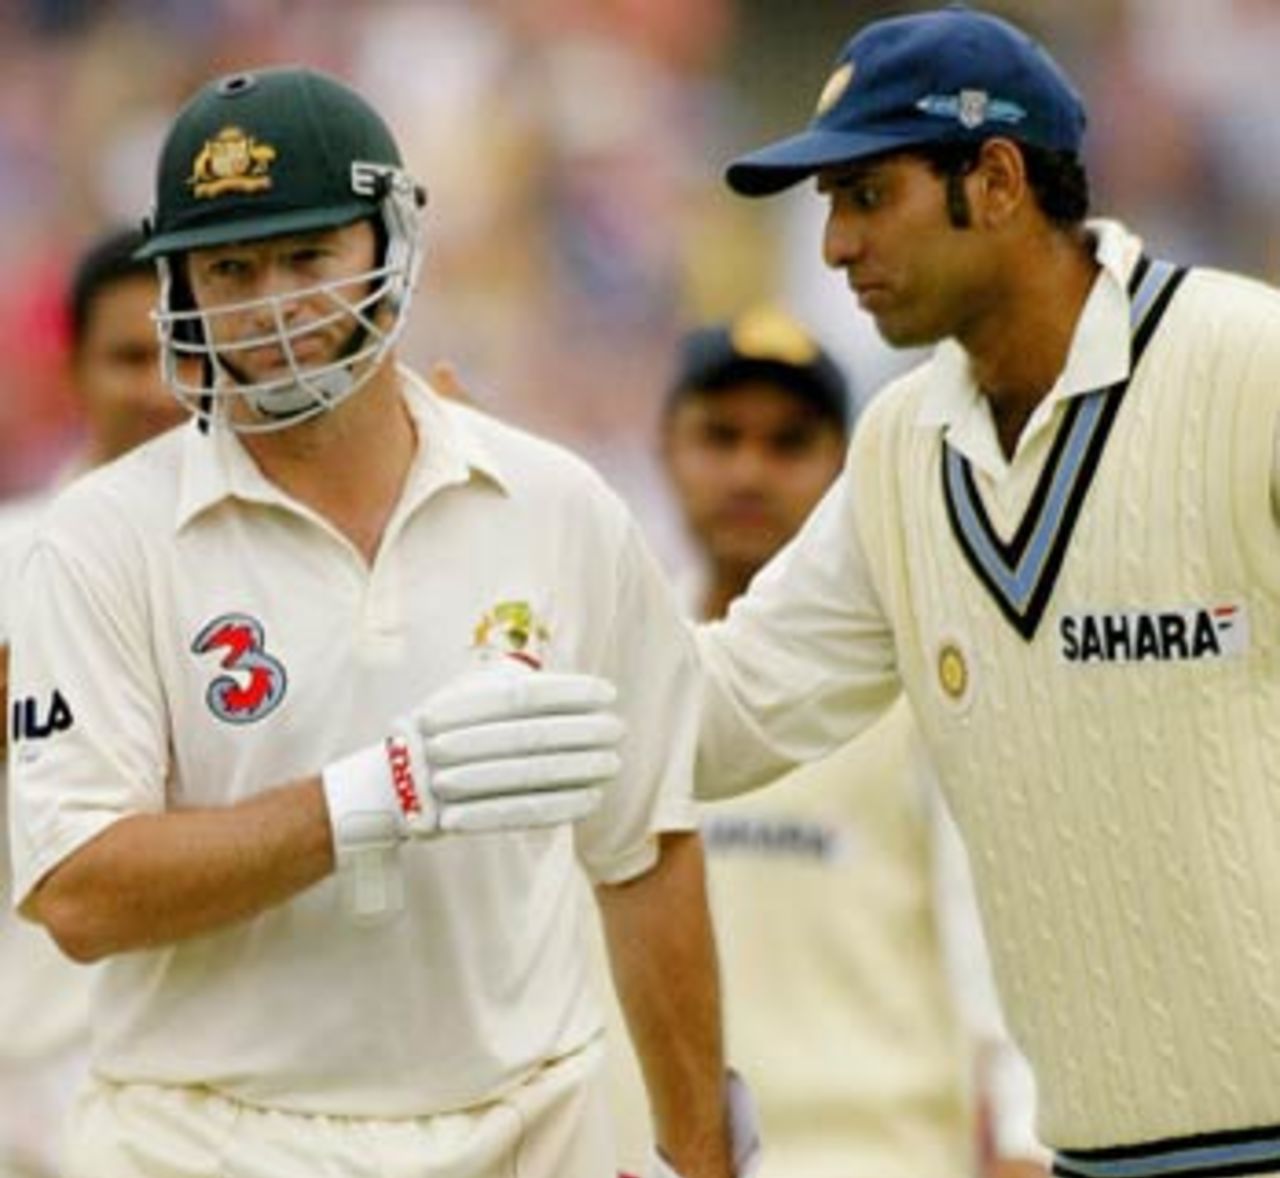 VVS Laxman rushes across to congratulate one of his heroes on a career well played, Australia v India, 4th Test, Sydney, 5th day, January 6, 2004